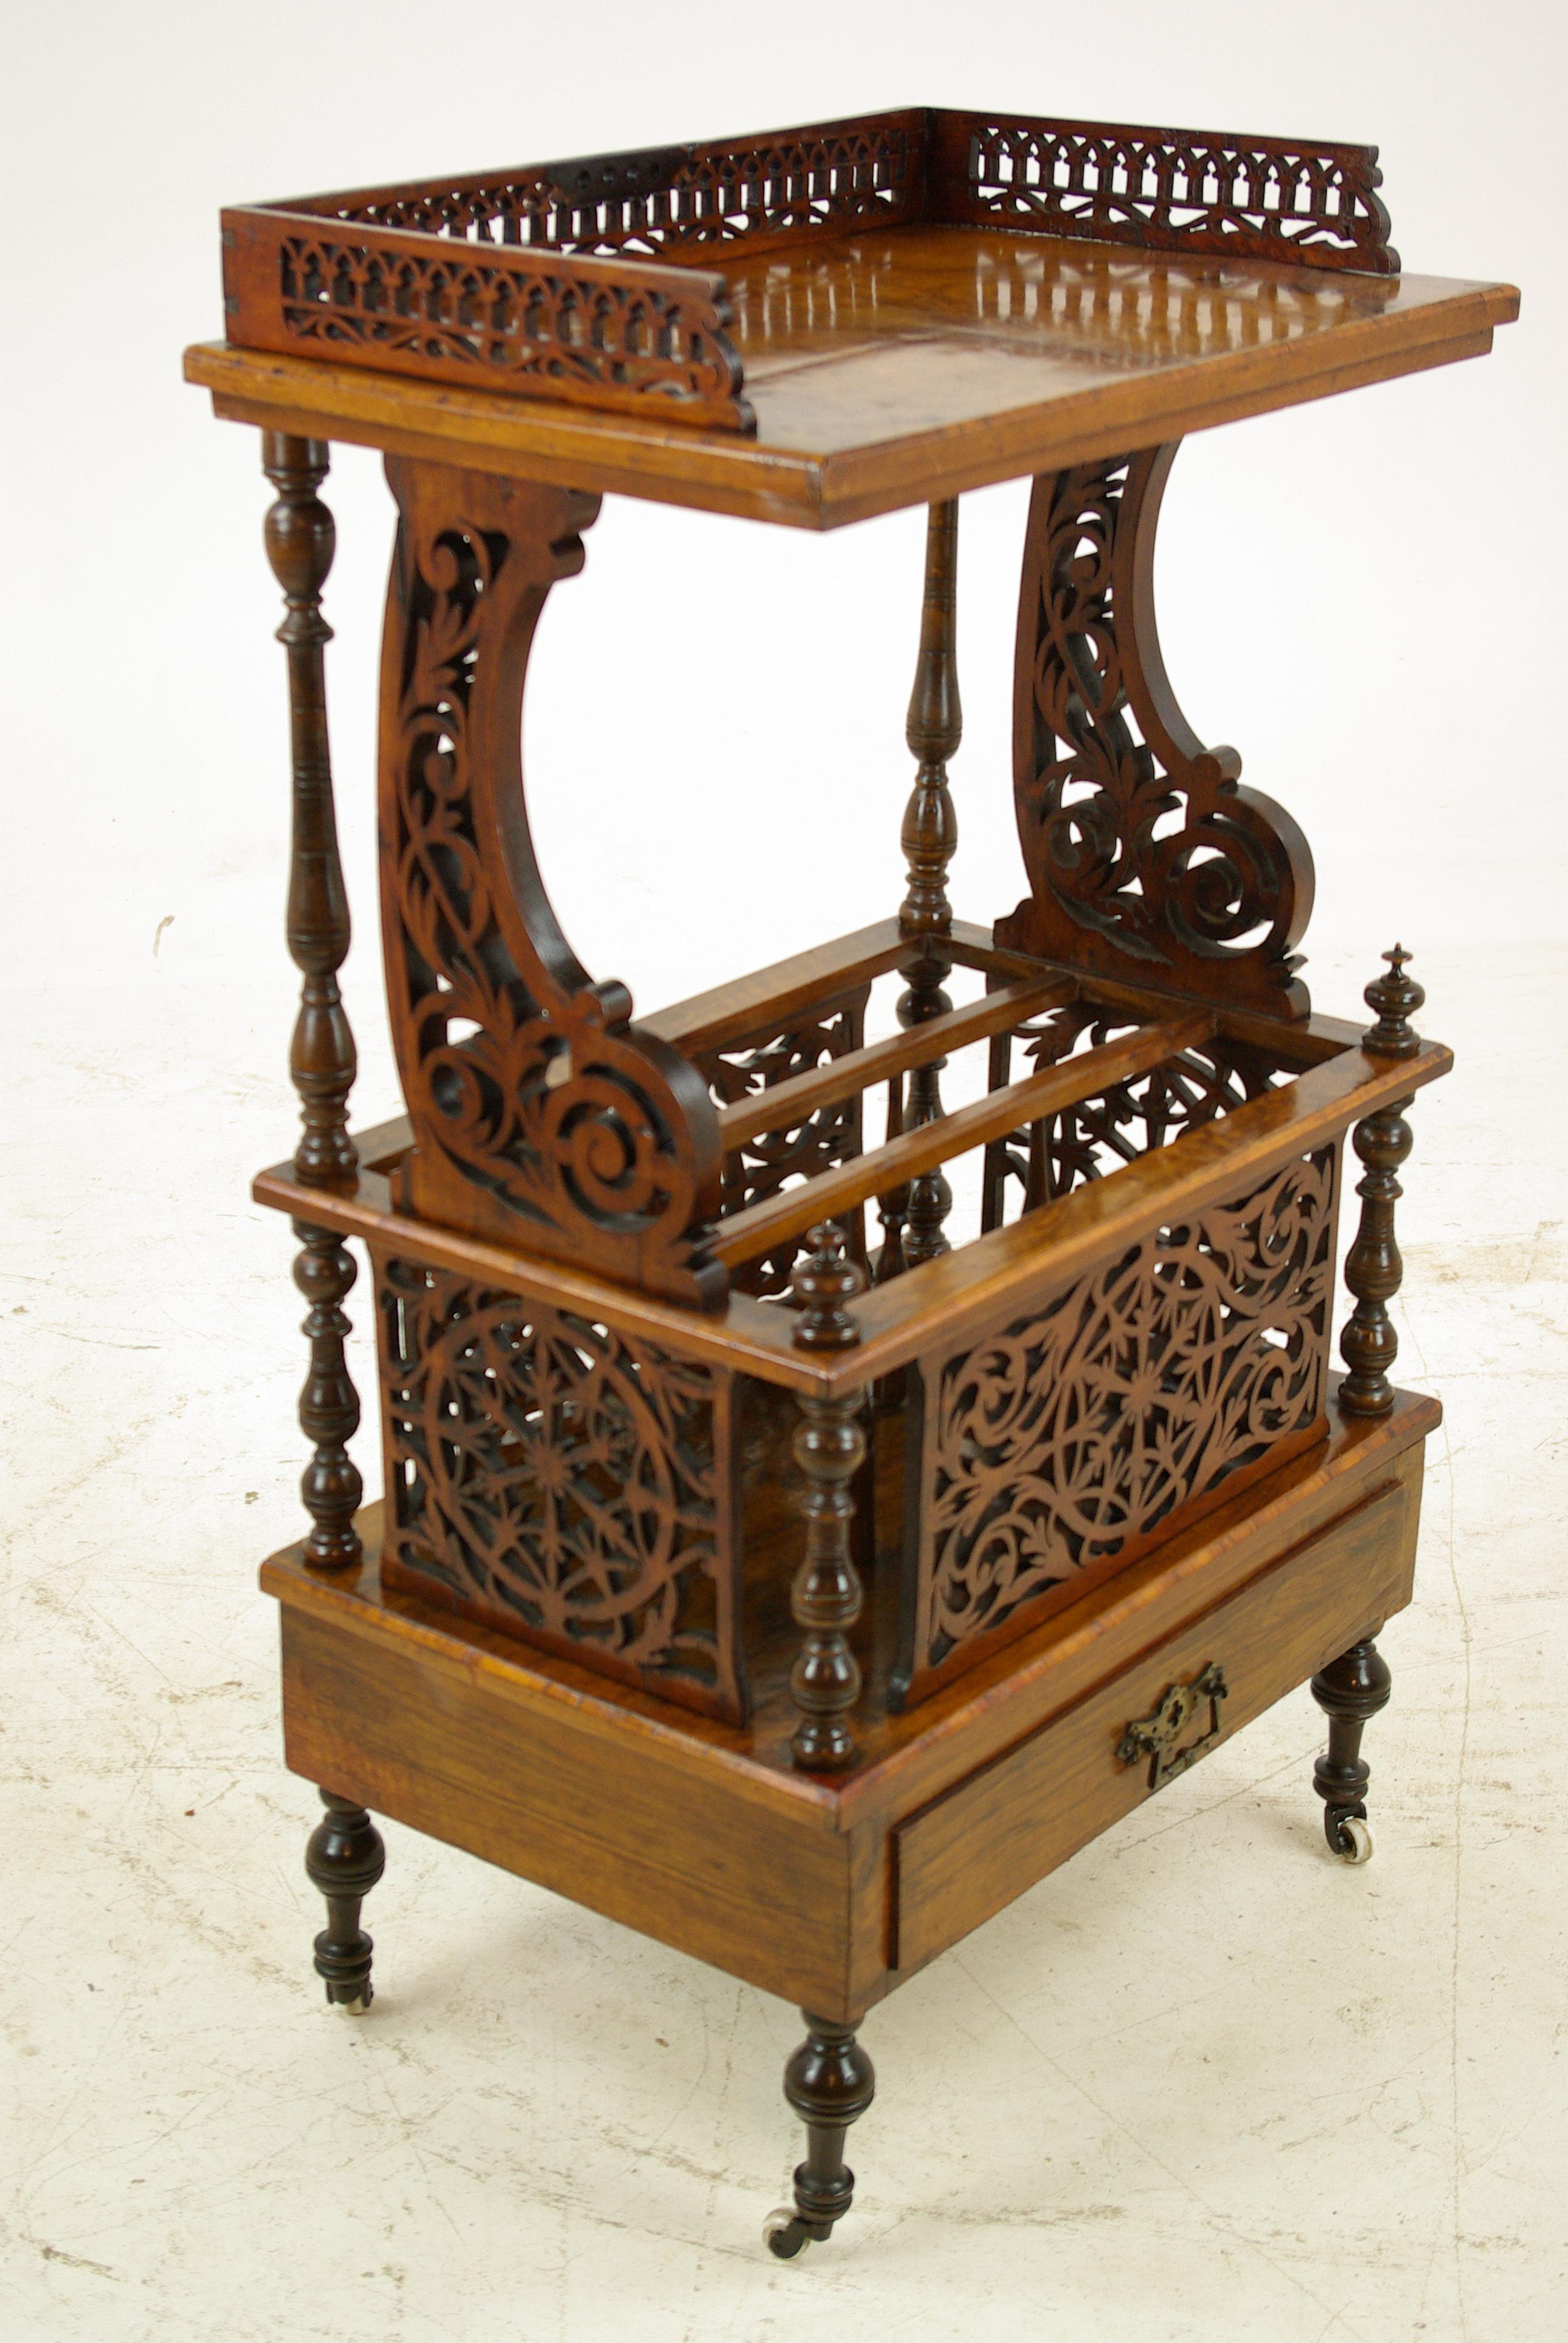 Antique walnut Canterbury, Victorian Music stand, walnut What Not, Scotland 1870, Antique Furniture, B1139

Scotland 1870
Shaped Fretwork to Gallery
Lovely burr walnut top
Shaped Fretwork supports to the Side
Three Divisions below
Supported by four